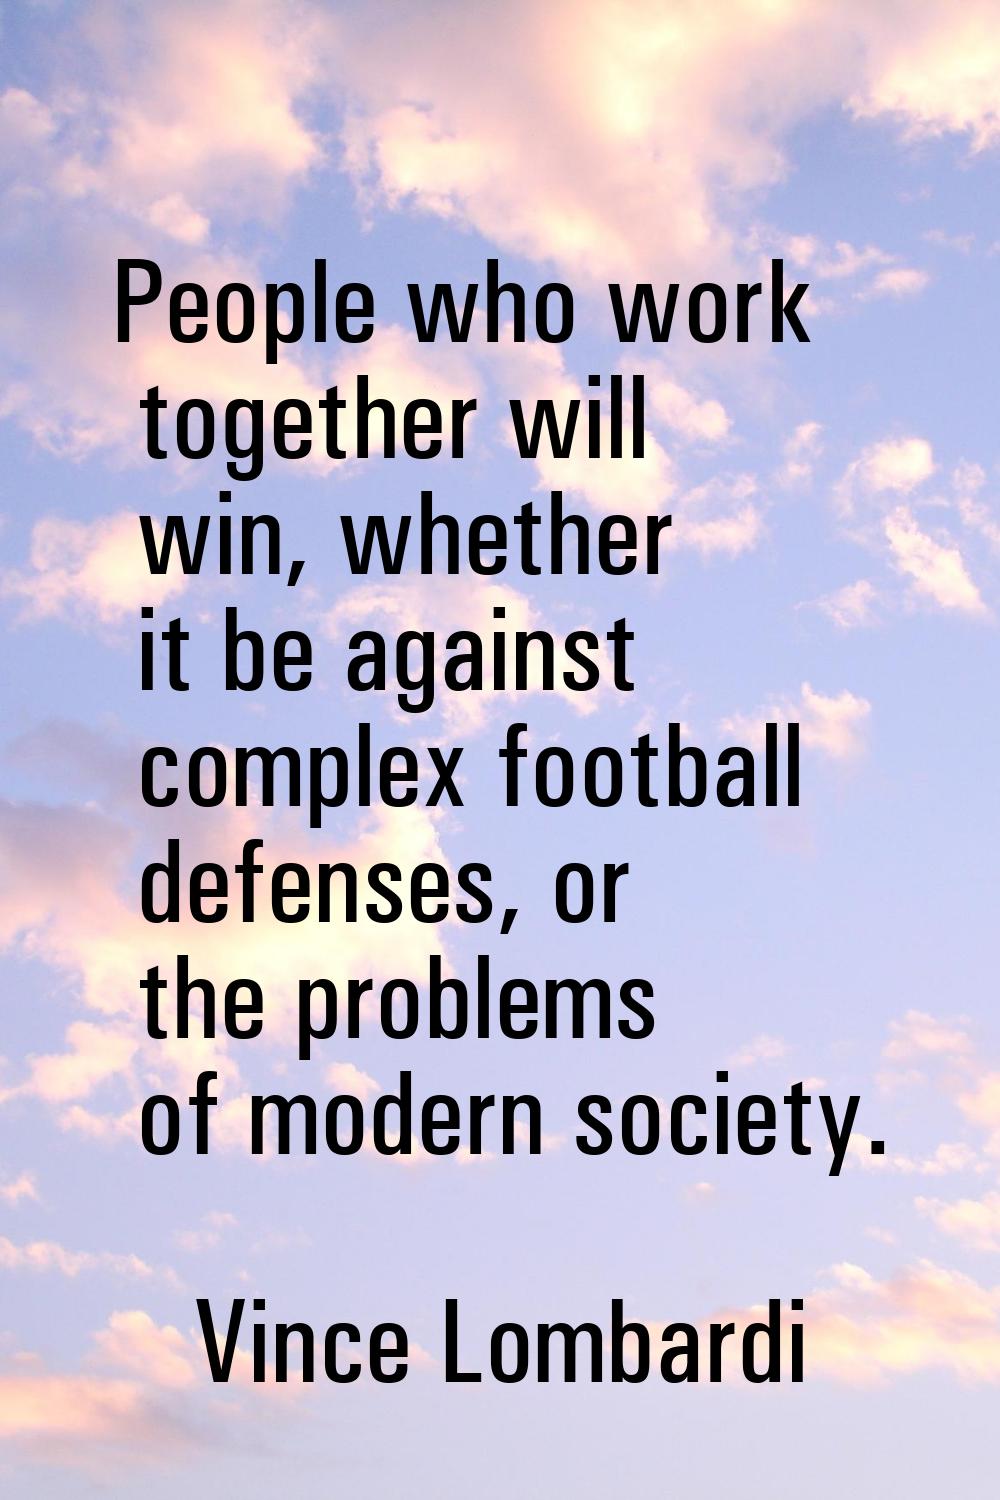 People who work together will win, whether it be against complex football defenses, or the problems